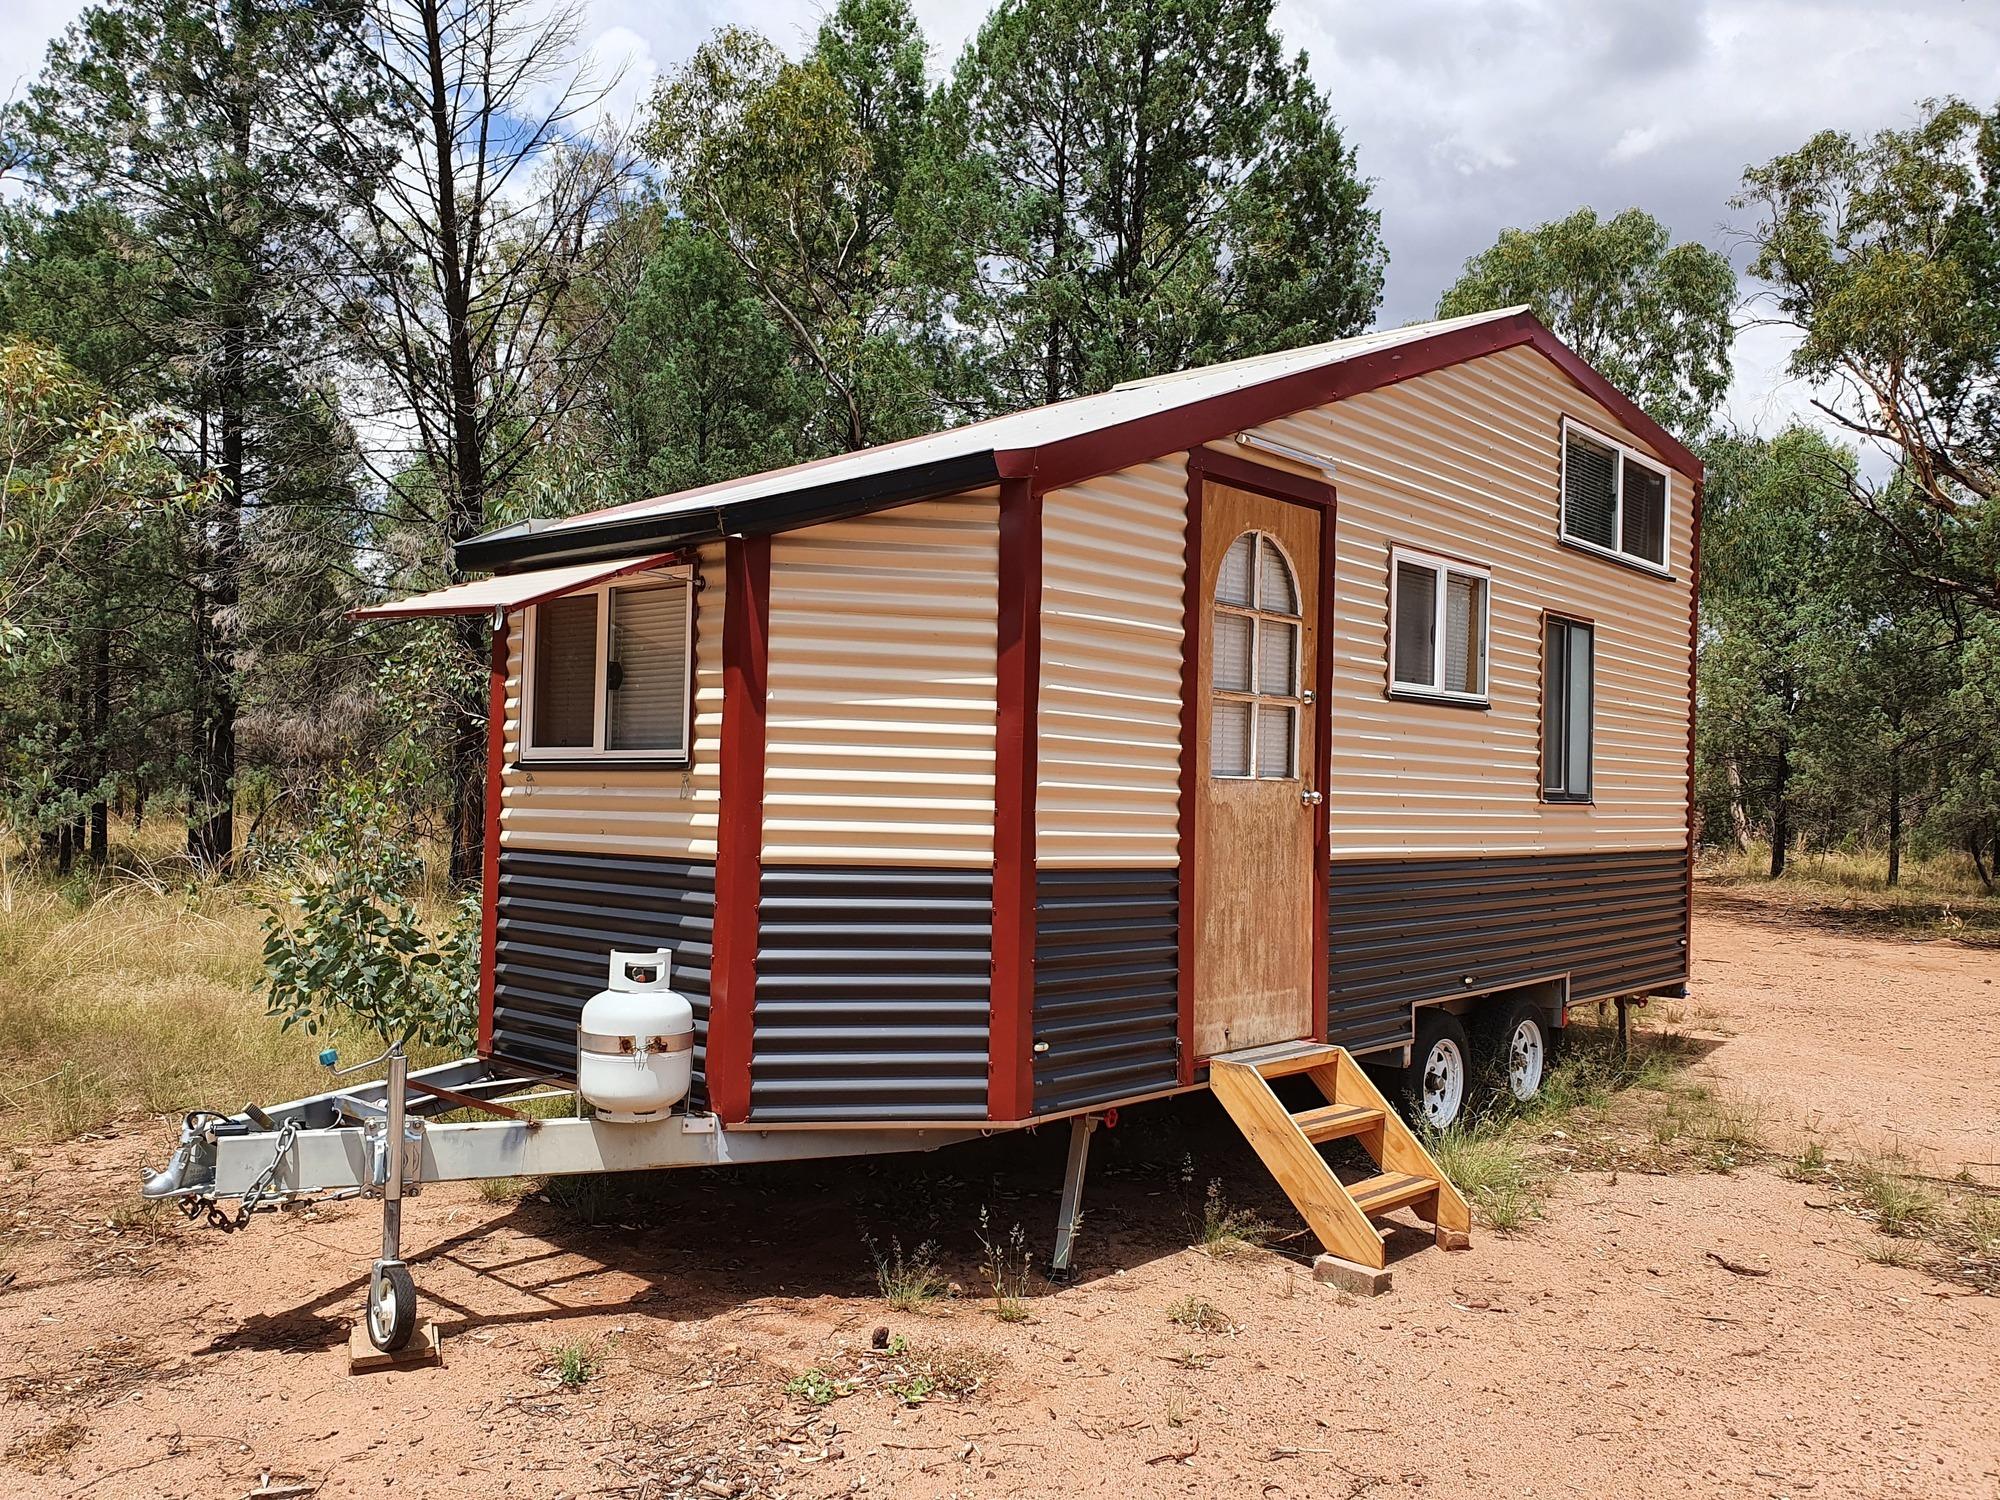 Judi from Dubbo, NSW loves COLORBOND® steel. Mobile tiny house Roofing, Guttering & Fascia, Walling cladding made from COLORBOND® steel in colours Classic Cream™, Manor Red® and Monument®